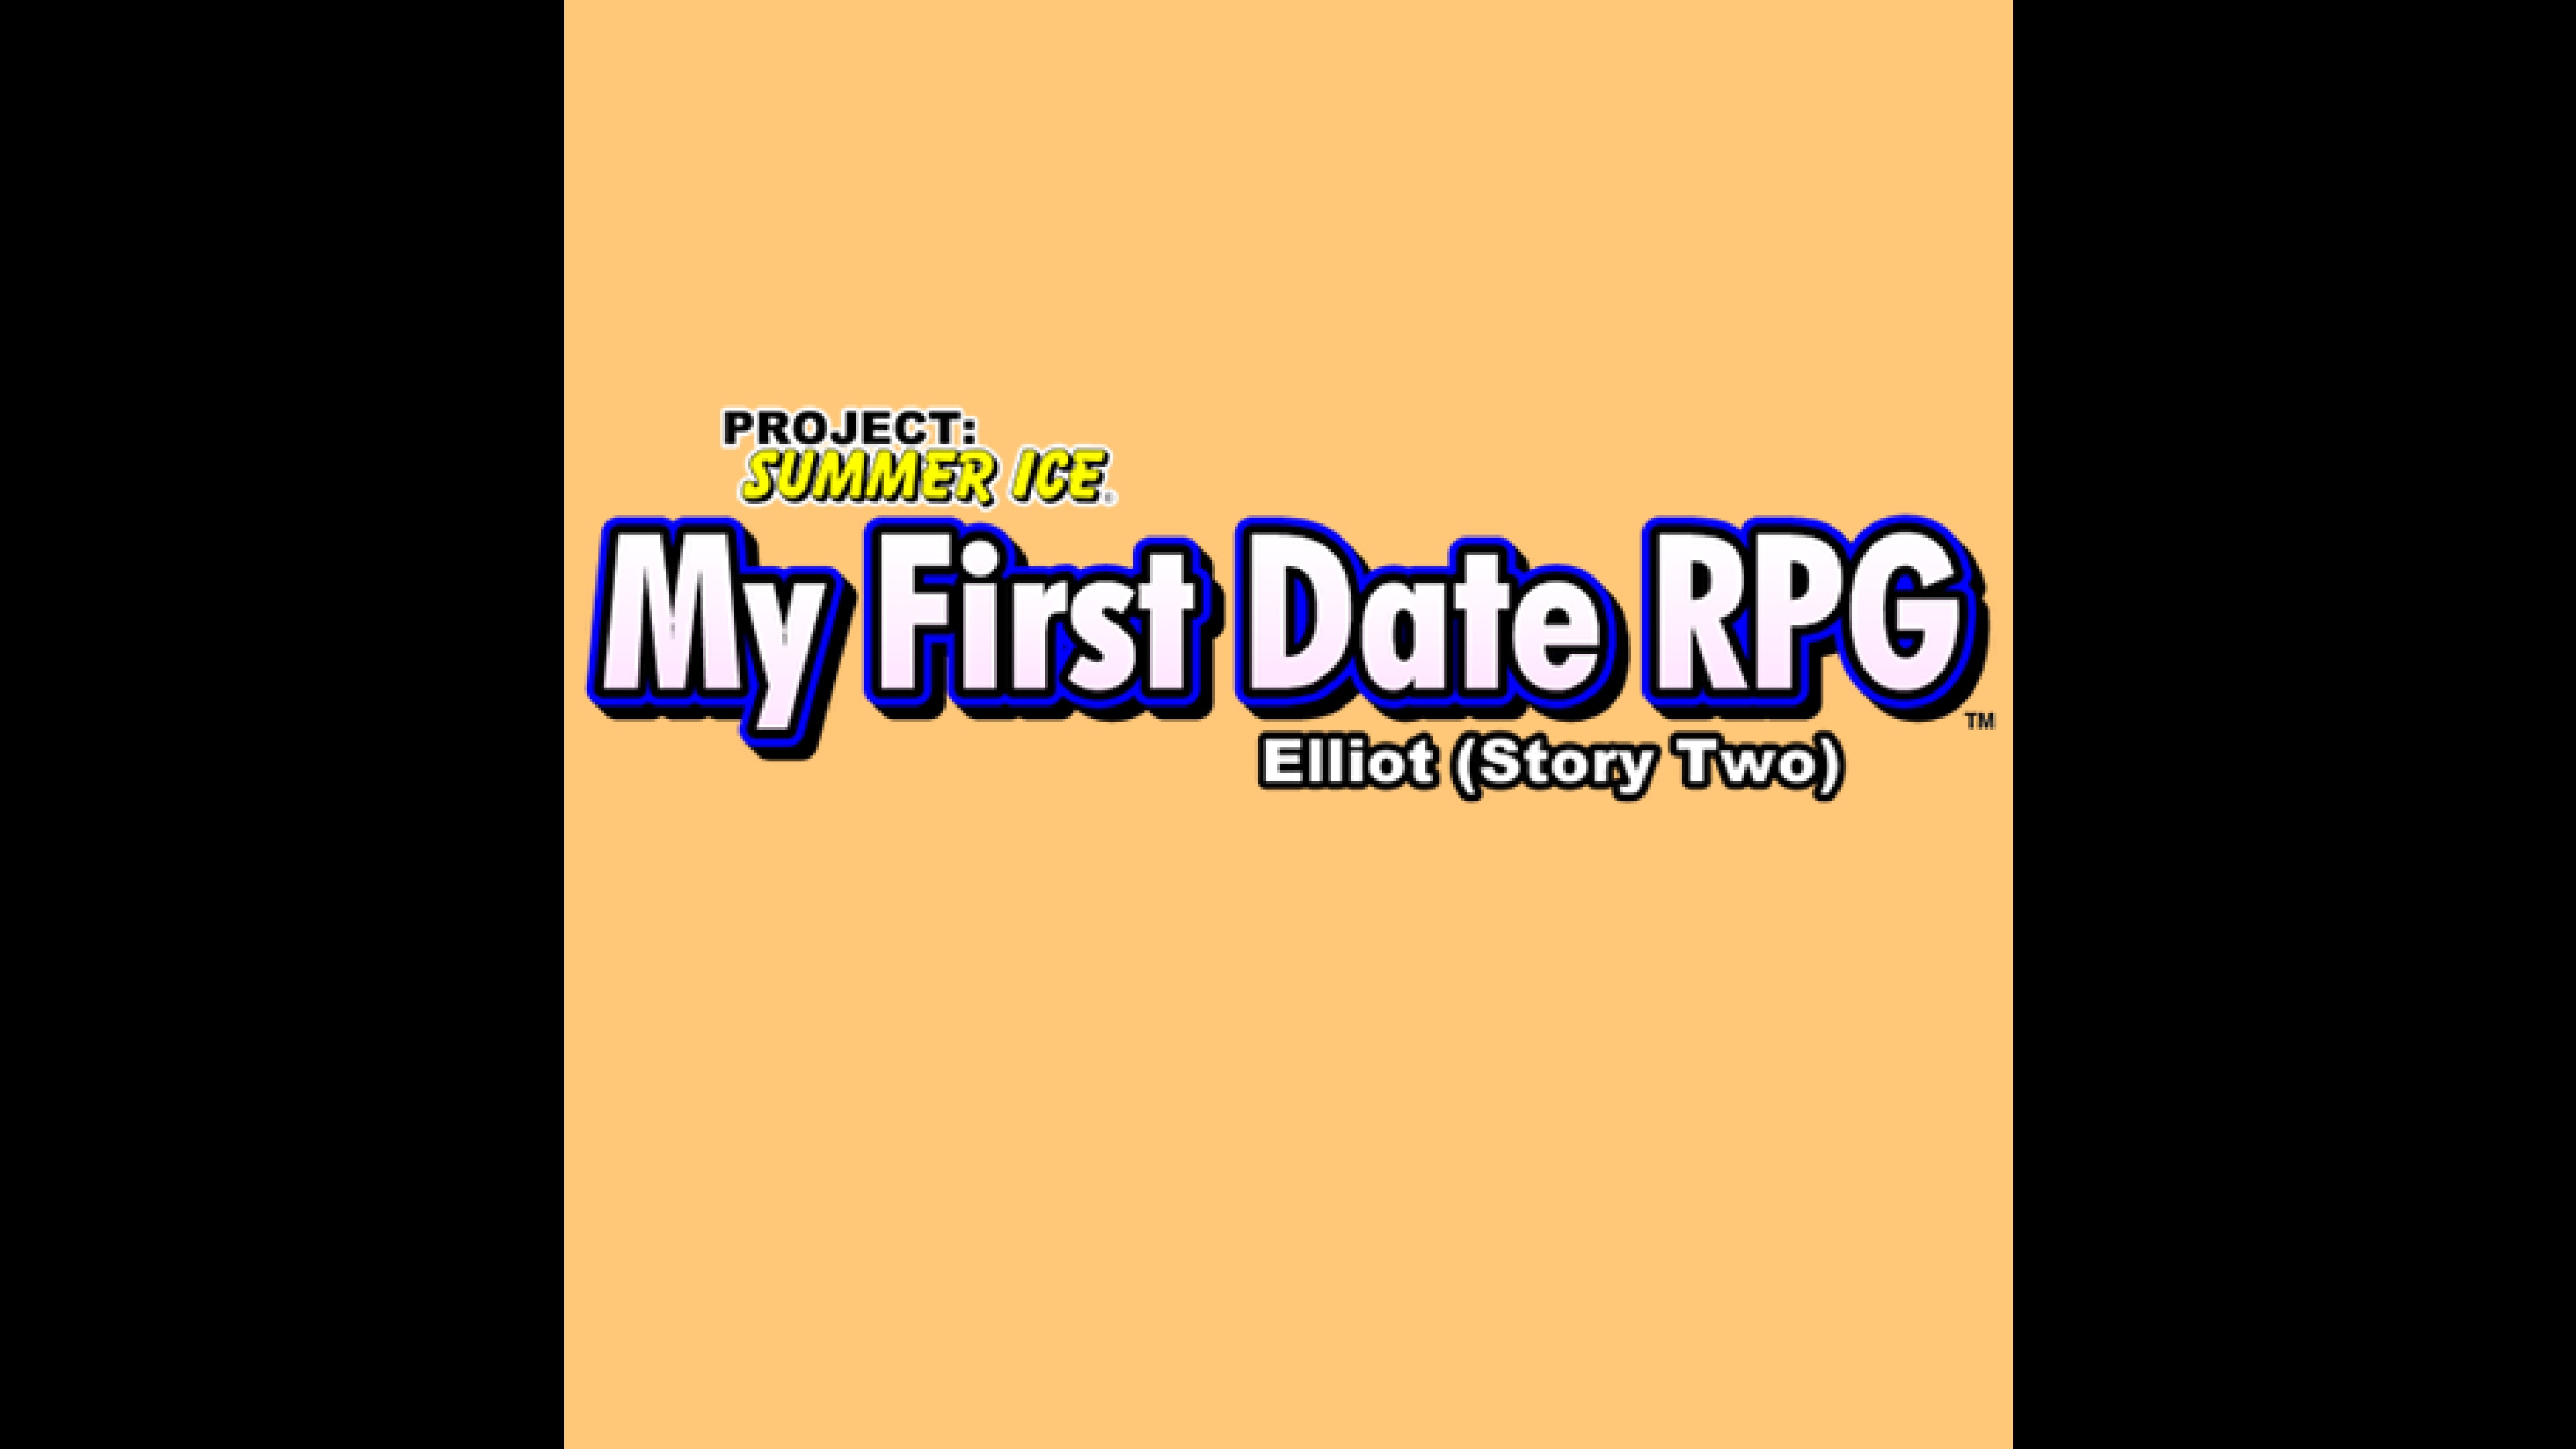 Elliot (Story Two) - My First Date RPG